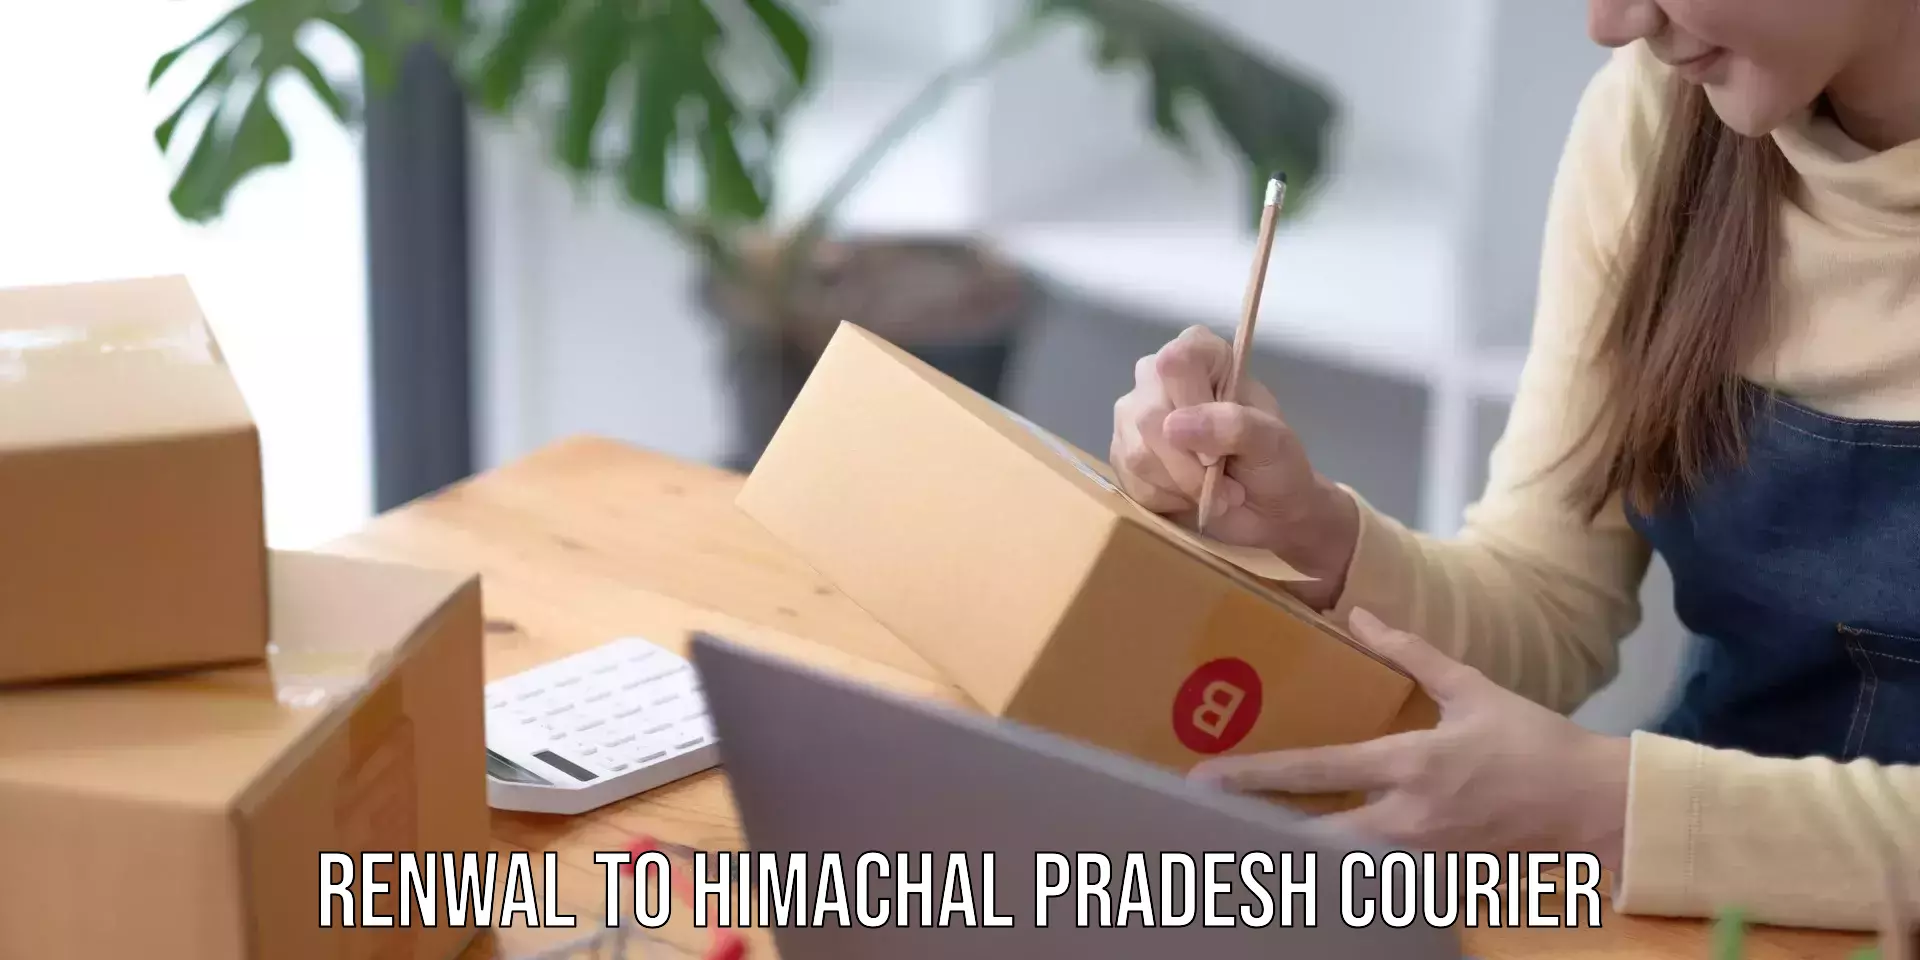 Multi-national courier services Renwal to Himachal Pradesh